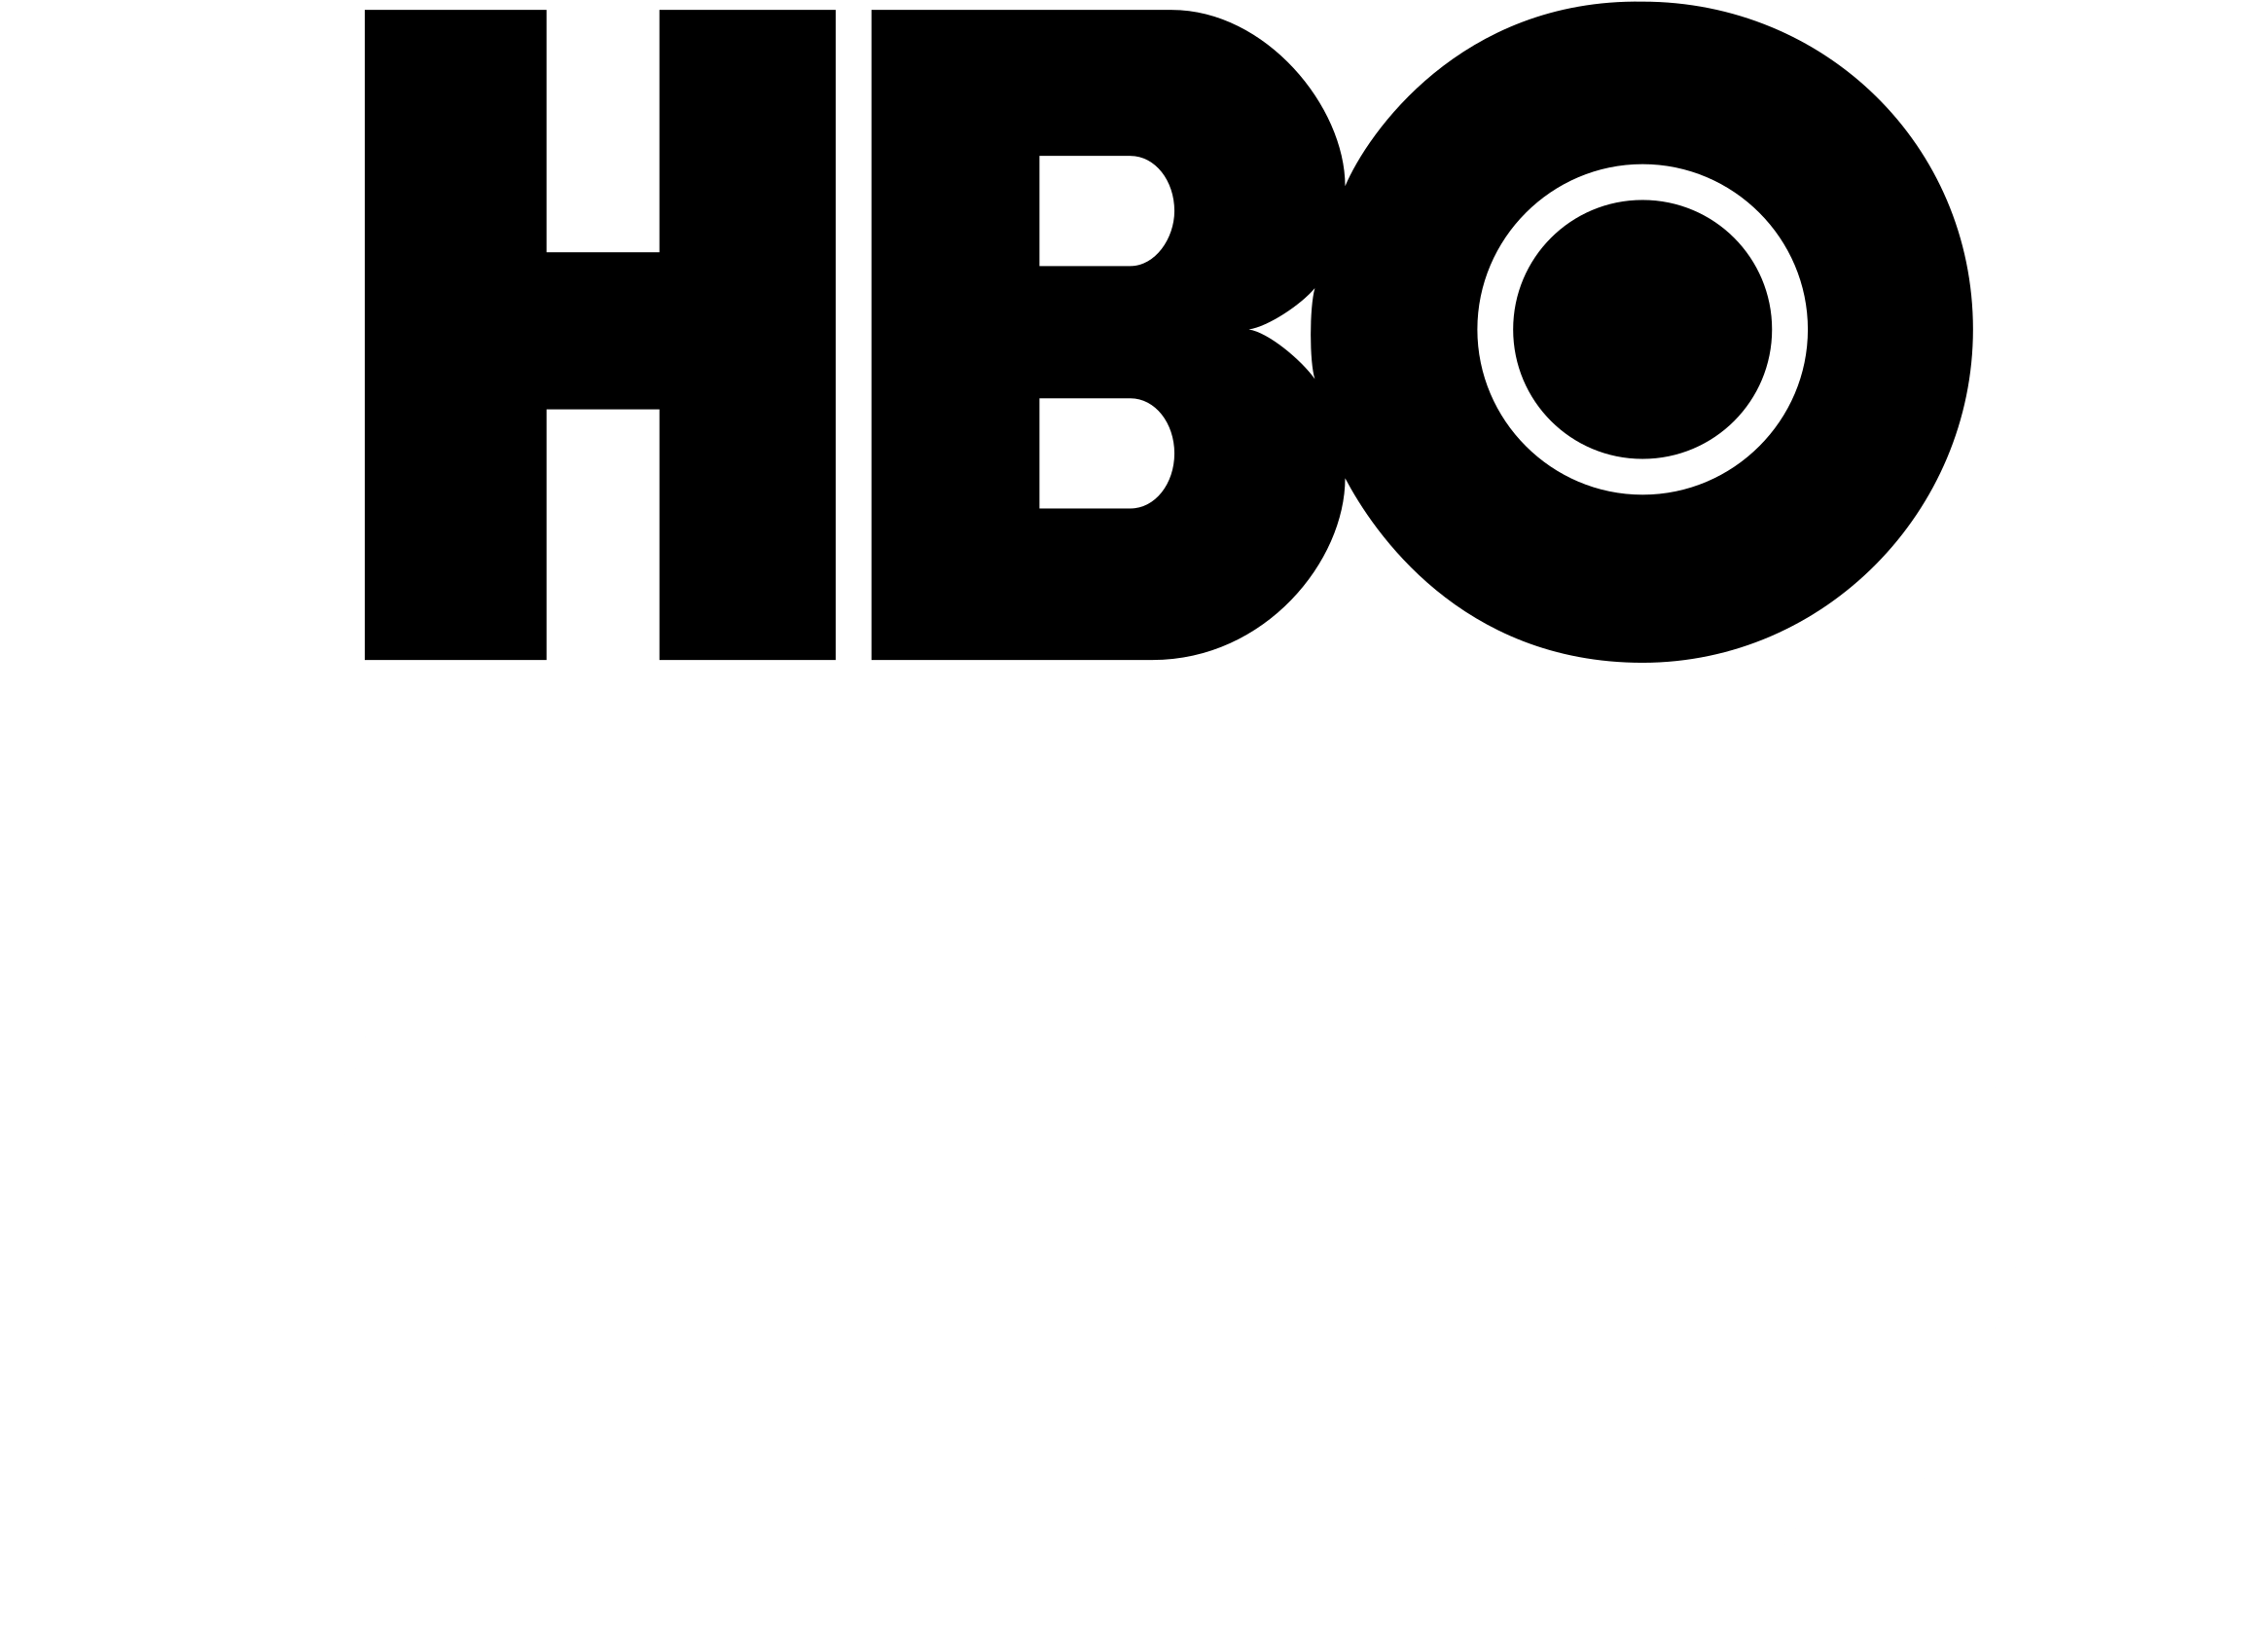 Hbo Family Logo Black And White - Game Of Thrones Realm To The Rescue, png ...